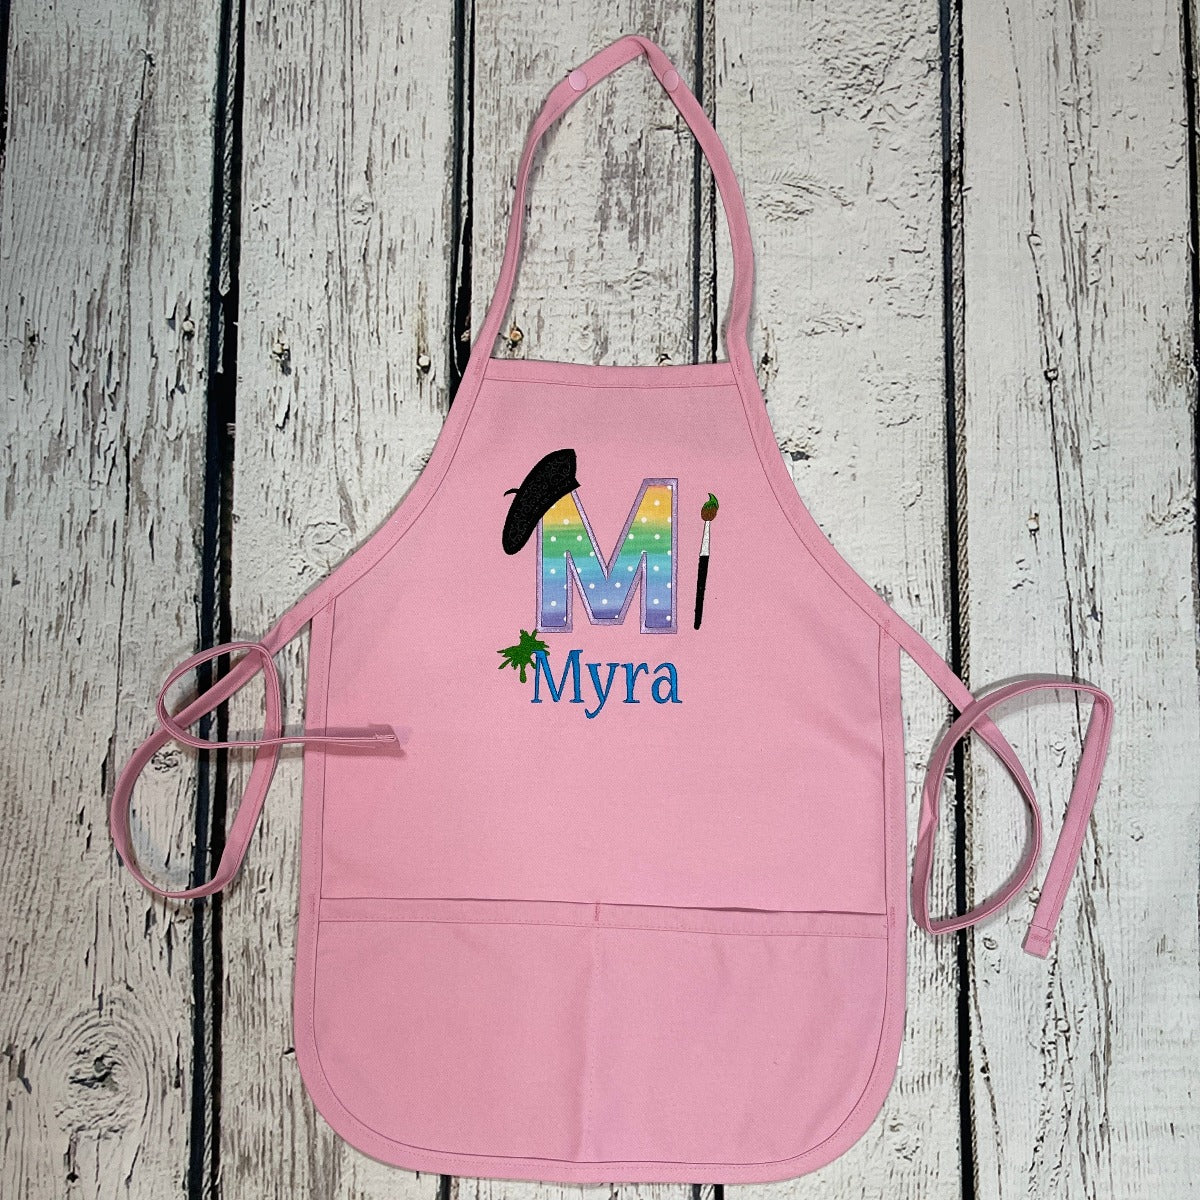 Girls Personalized Embroidered Art Apron for Arts & Crats or Painting